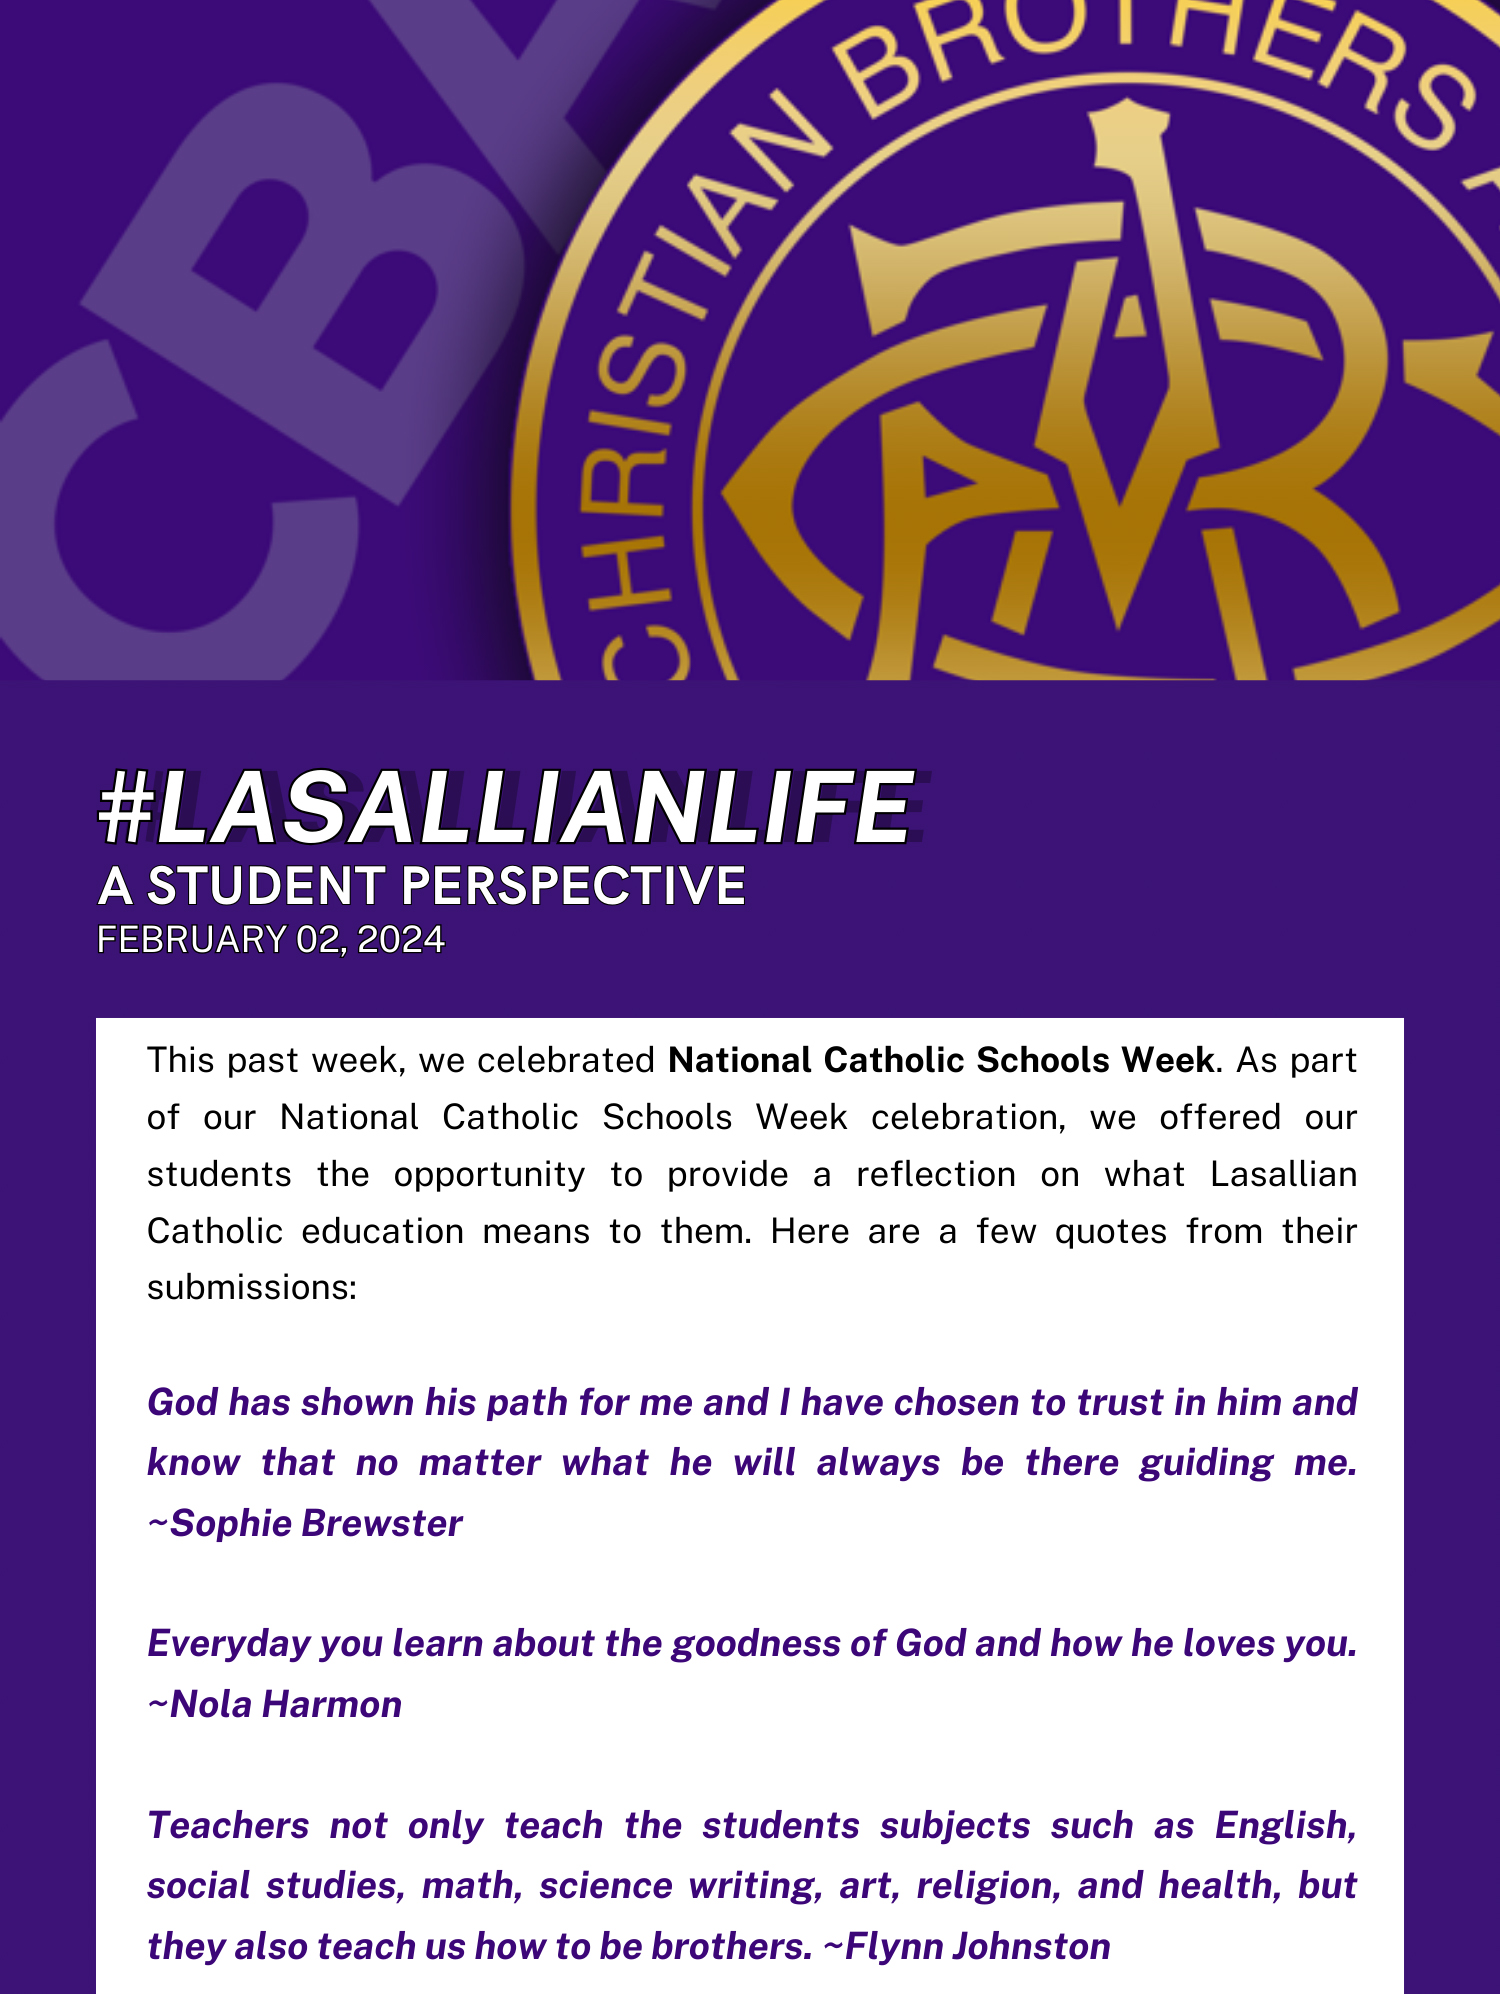 #LasallianLife : A Student Perspective